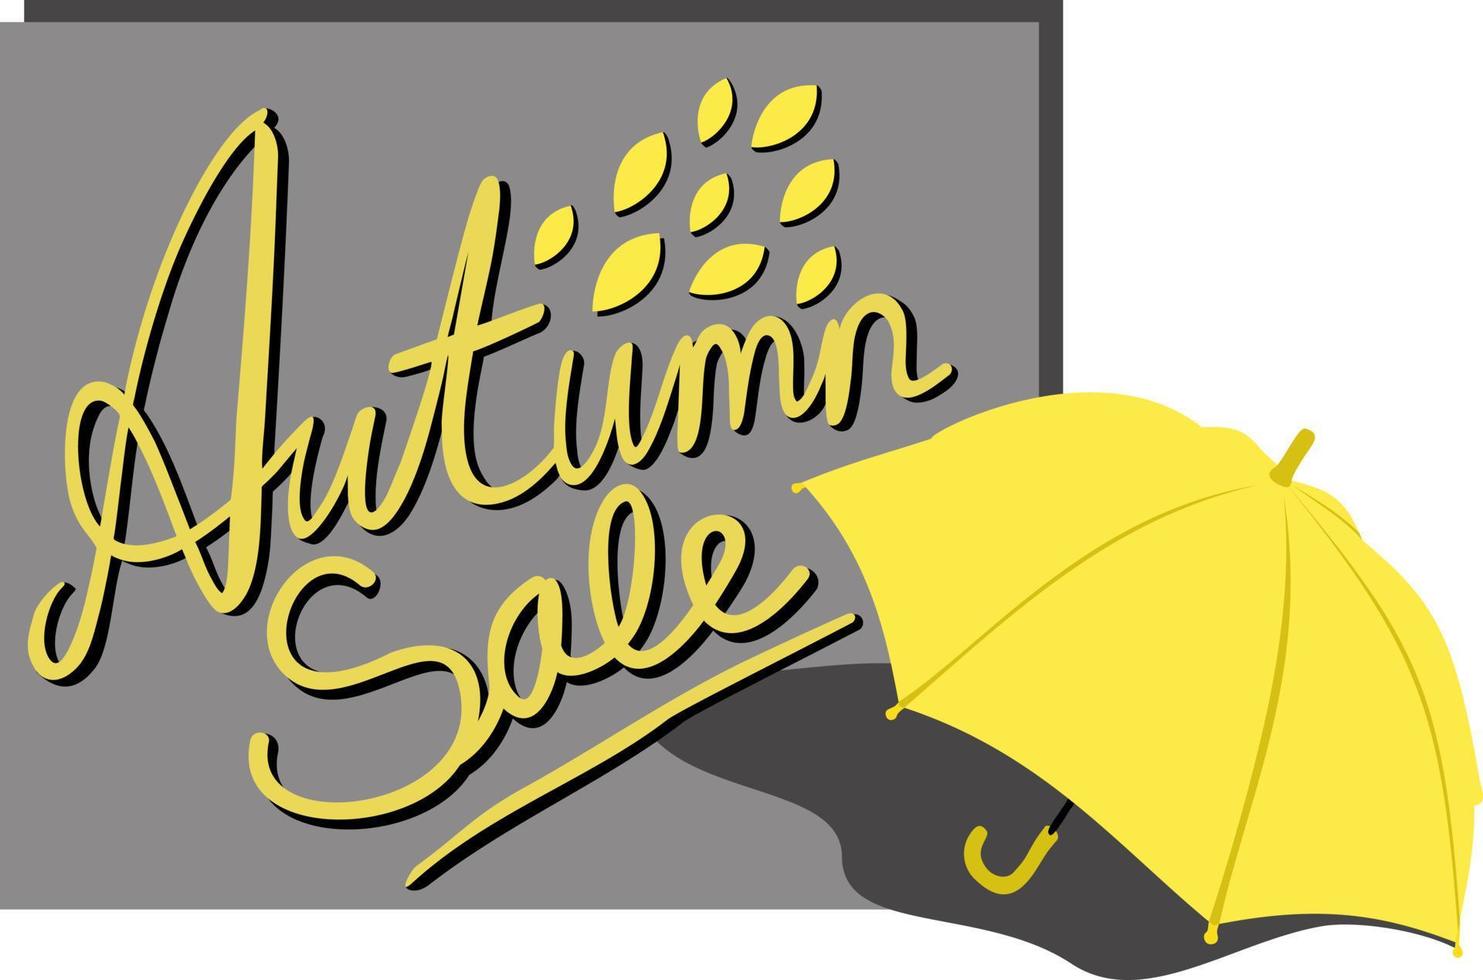 Autumn sale. Vector illustration on white background. Yellow and grey color.